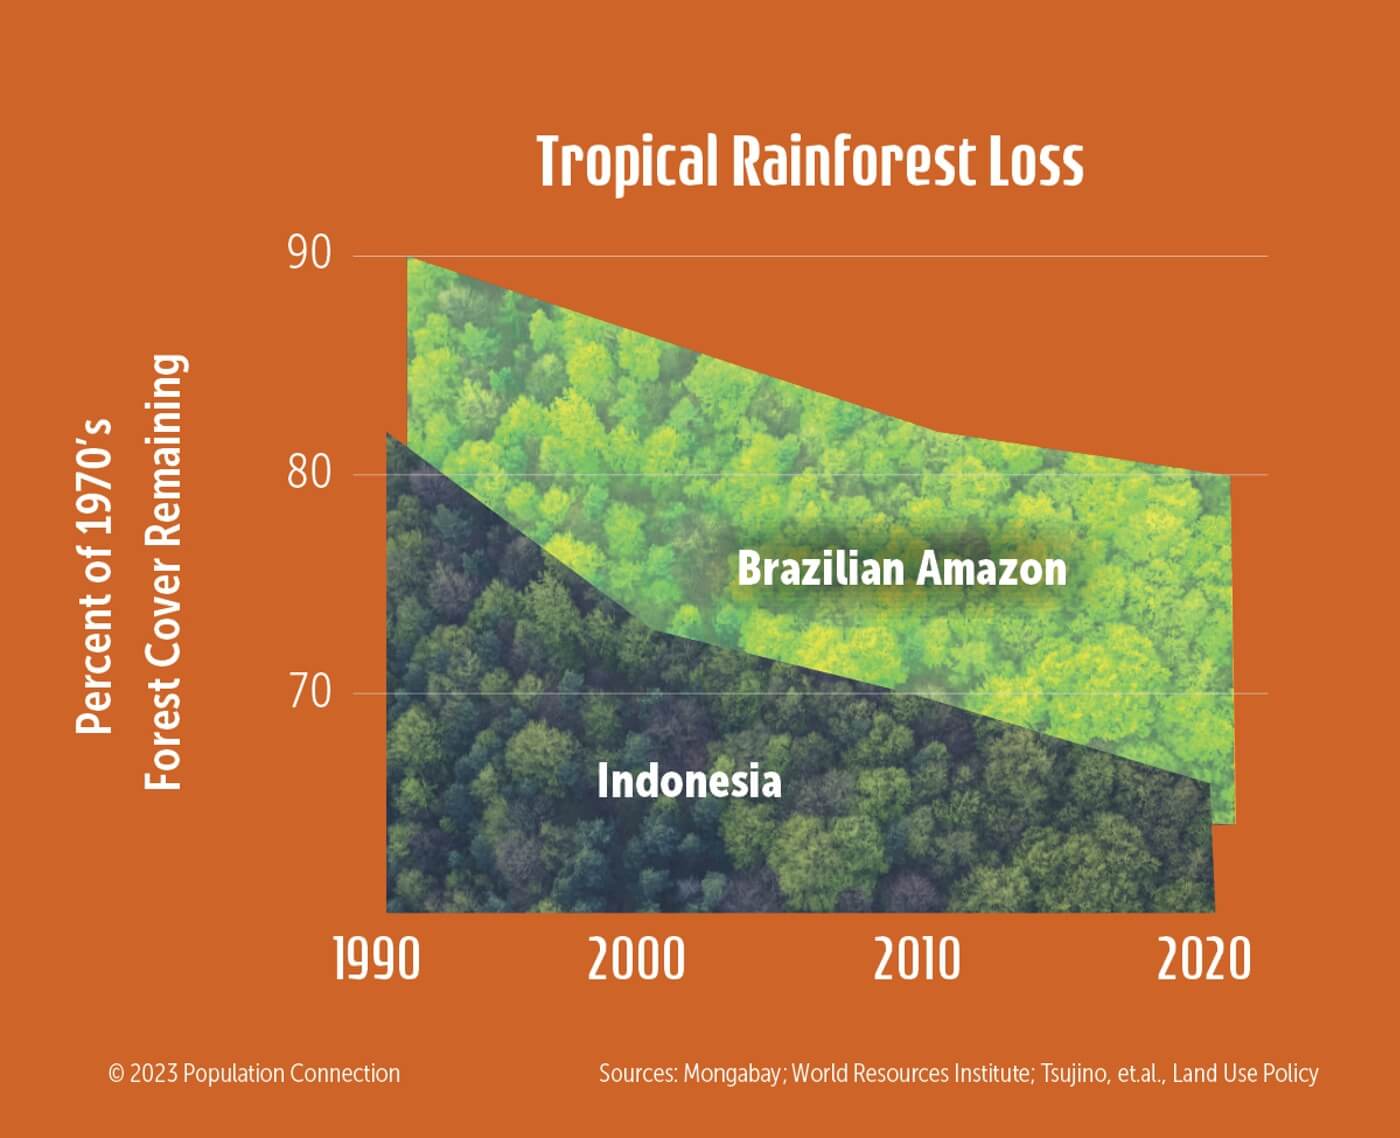 A graph of the Brazilian Amazon and Indonesia's tropical rainforest loss